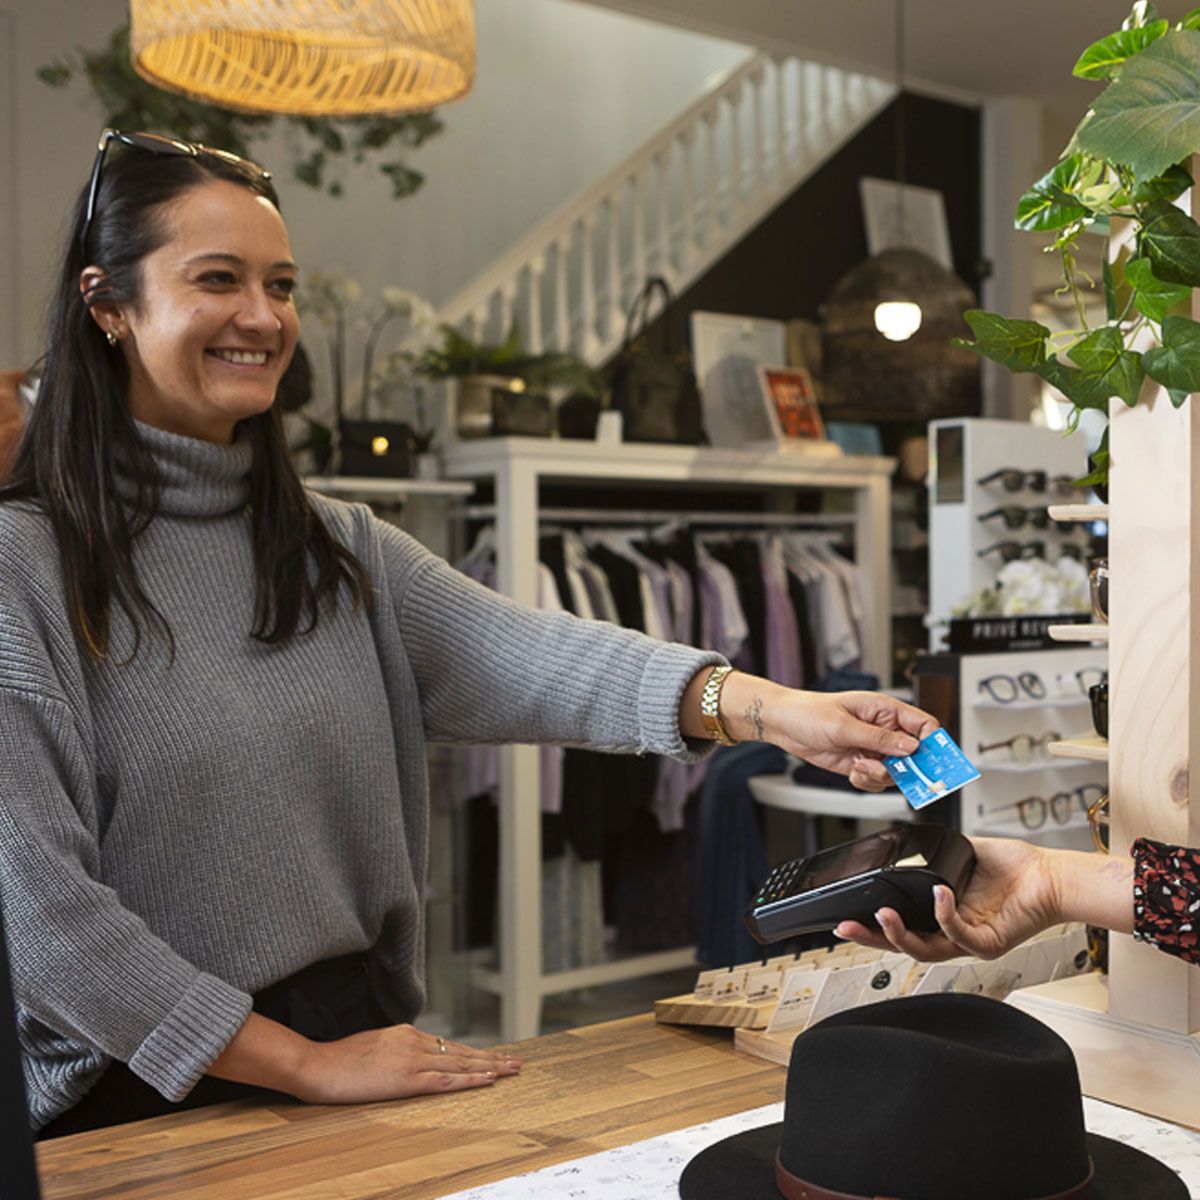 Lady paying for hat by tapping card on EFTPOS terminal